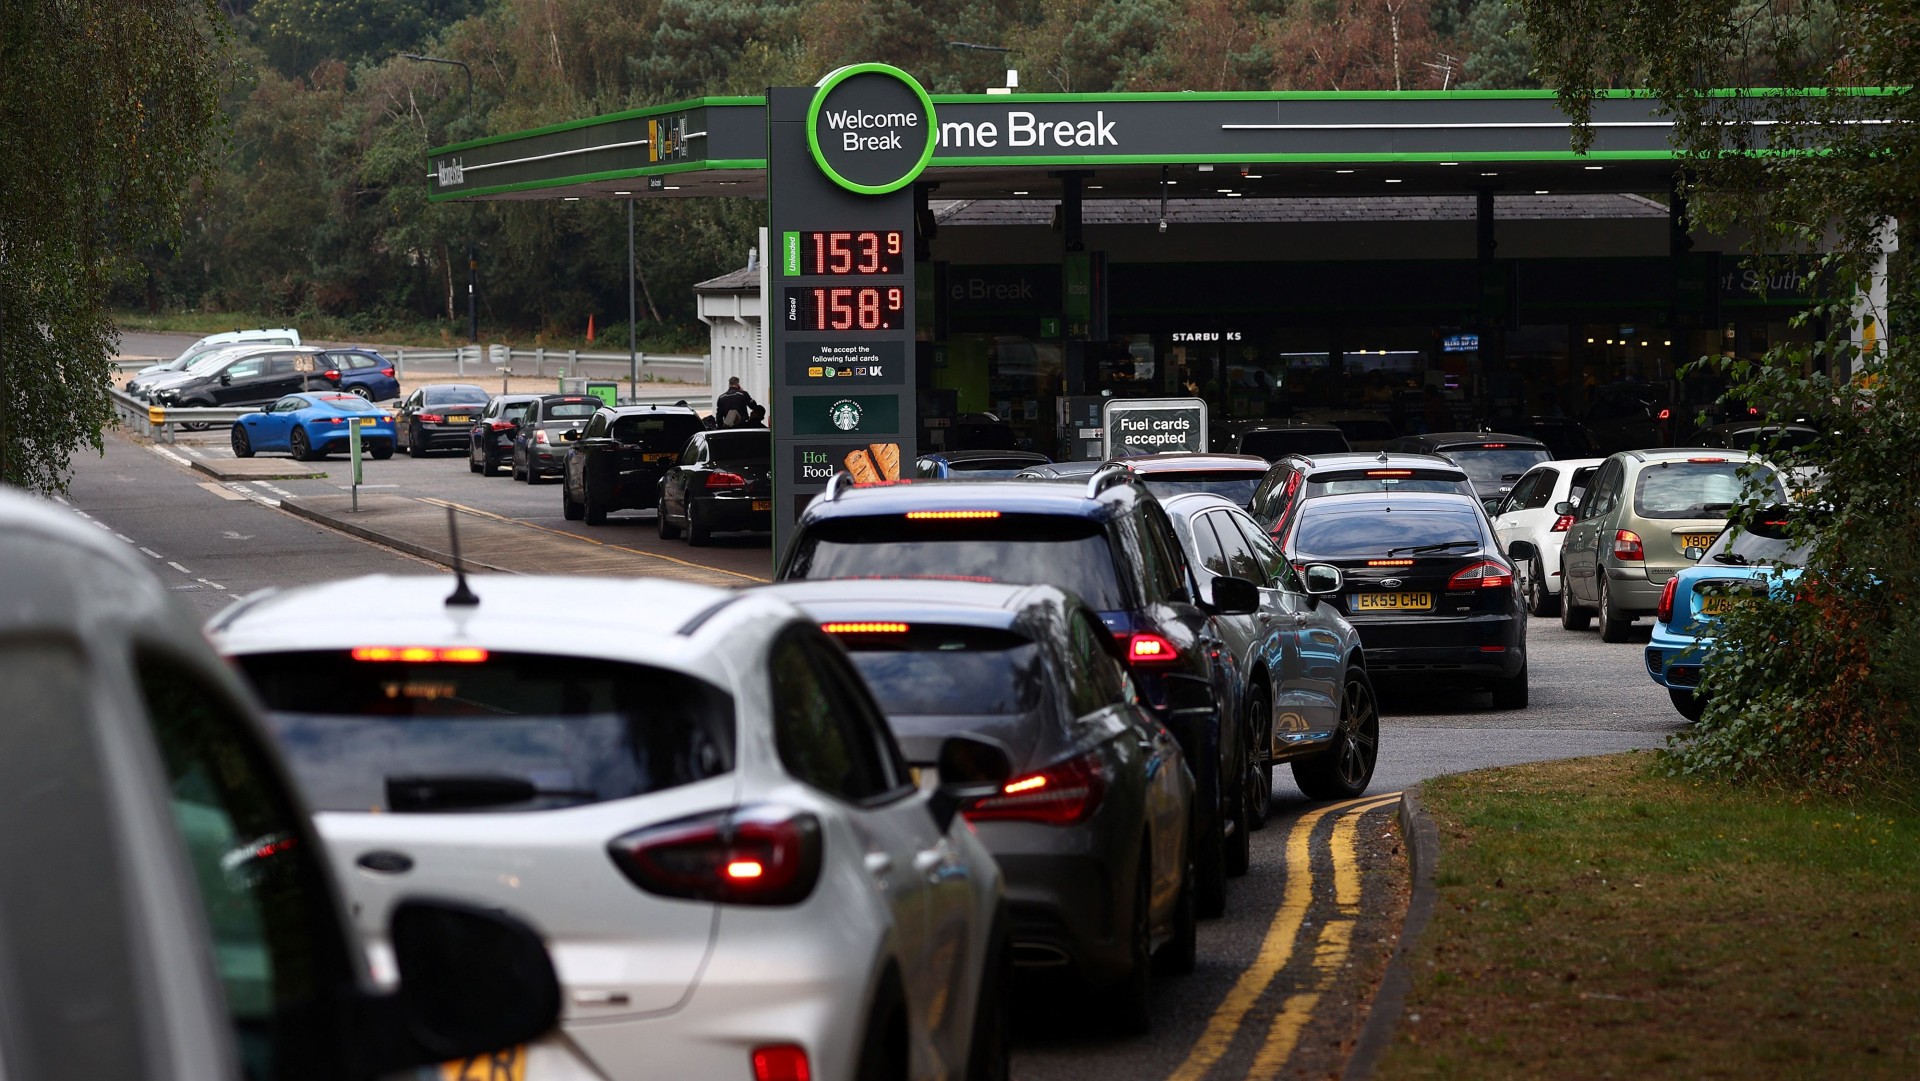 Queue for fuel at motorway station